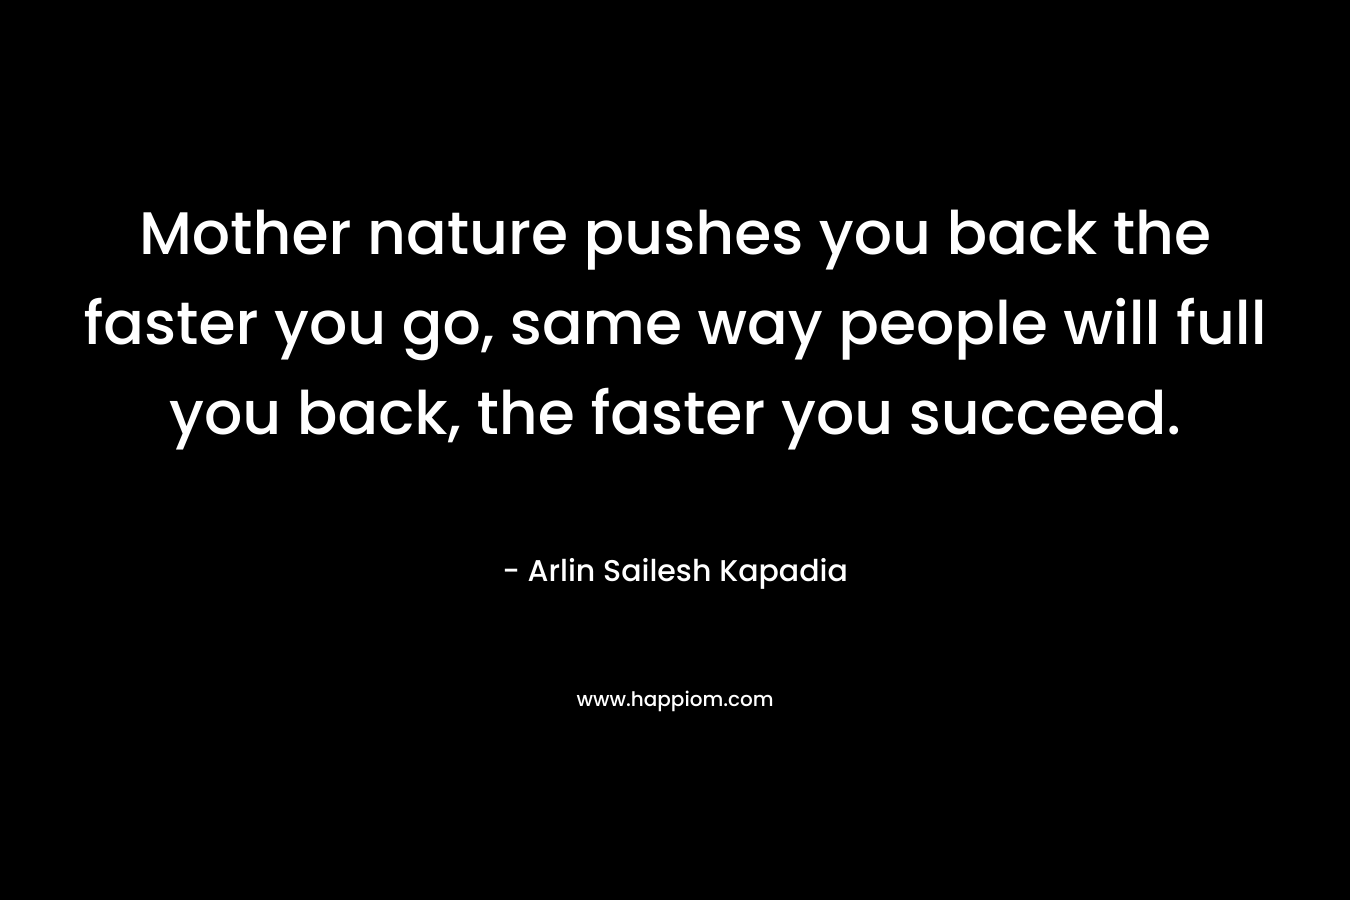 Mother nature pushes you back the faster you go, same way people will full you back, the faster you succeed.